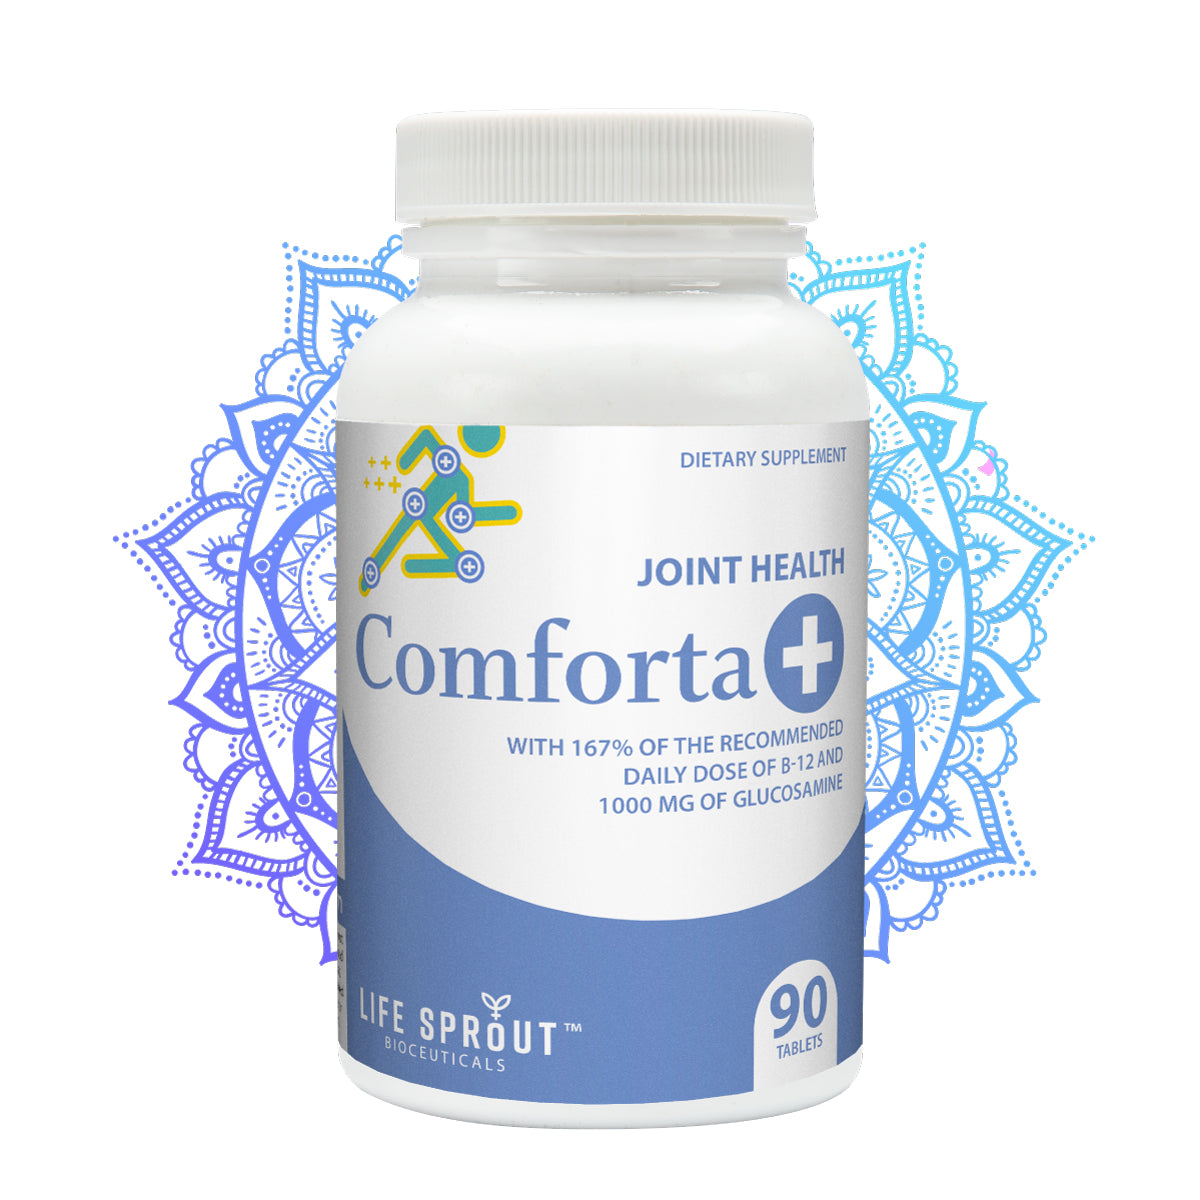 Comforta + for Joint Health